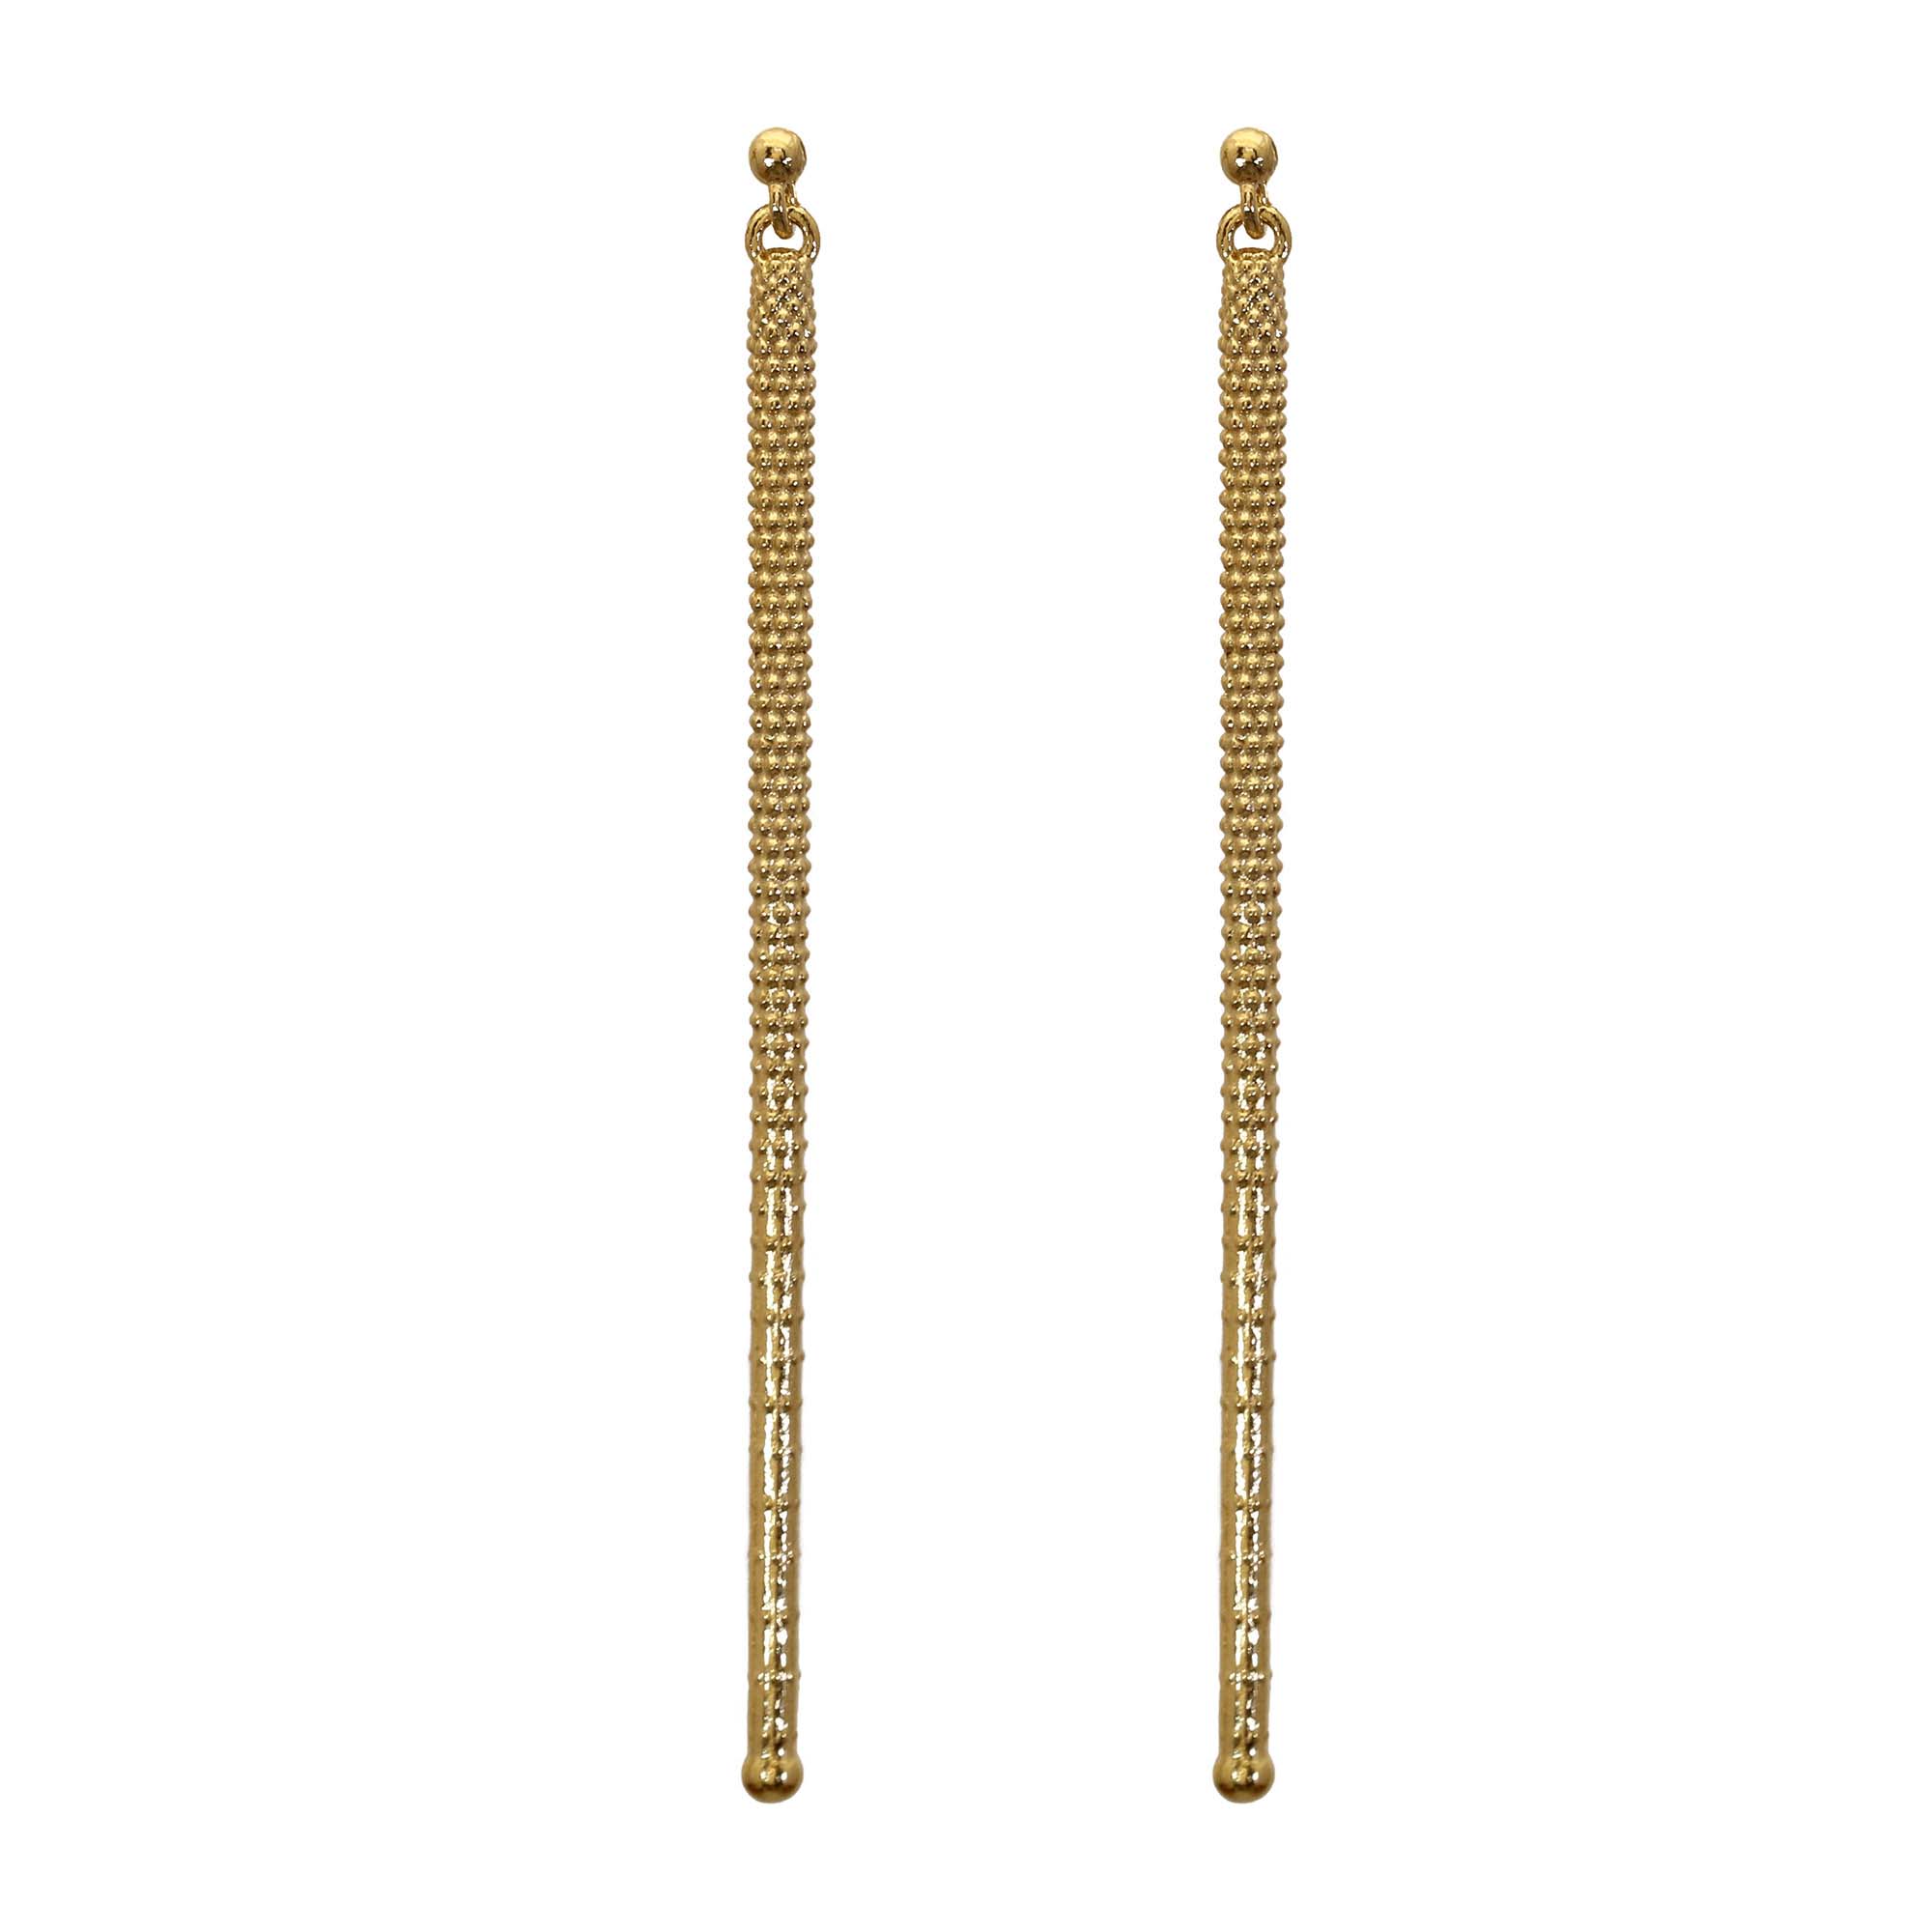 Lava Yellow Gold Linear Drop Earrings with lava texture